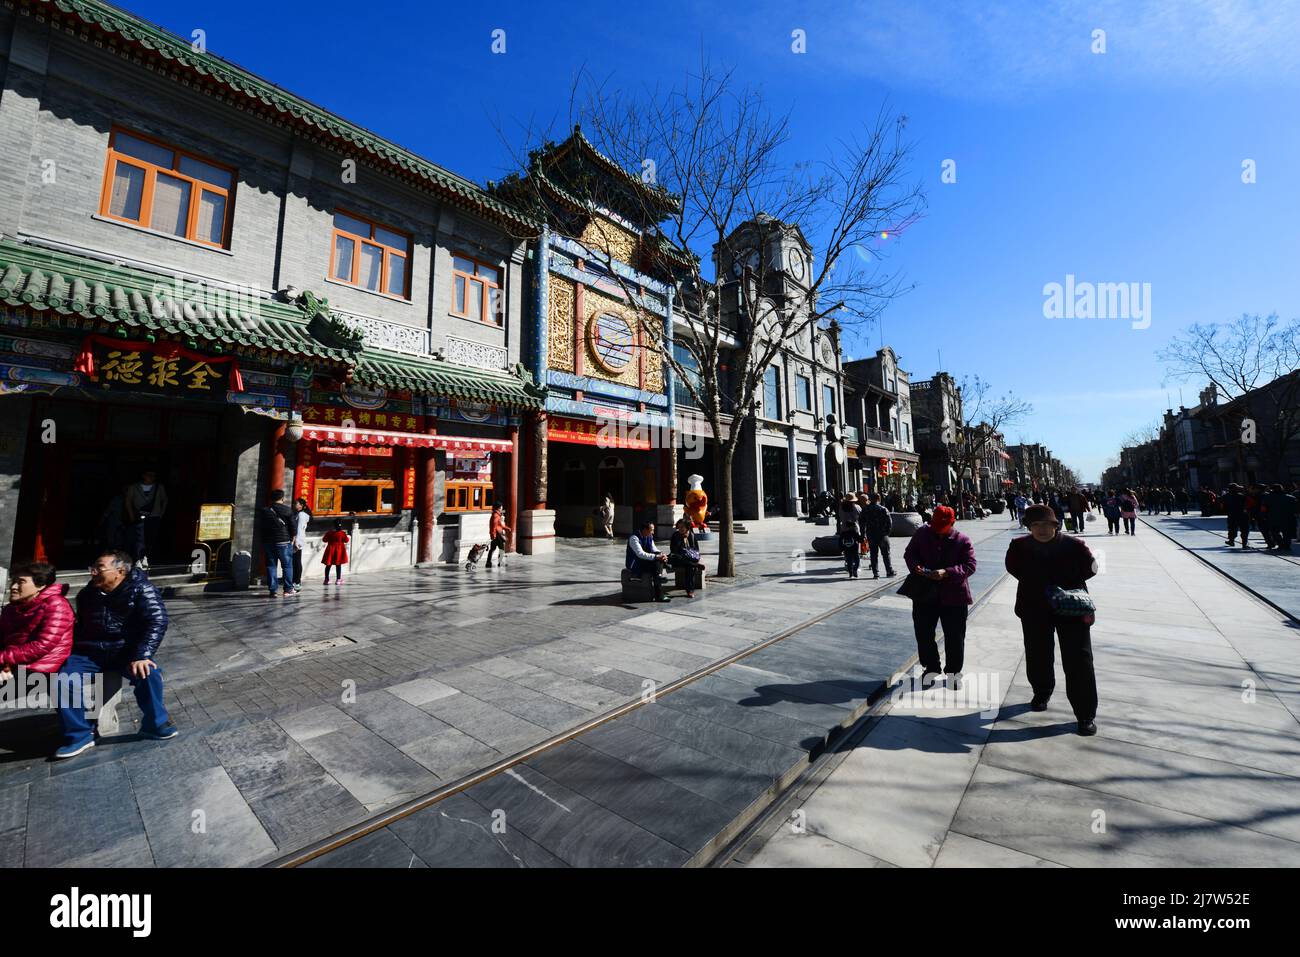 Qianmen Street is a famous pedestrian street for shopping and sightseeing. Beijing, China. Stock Photo